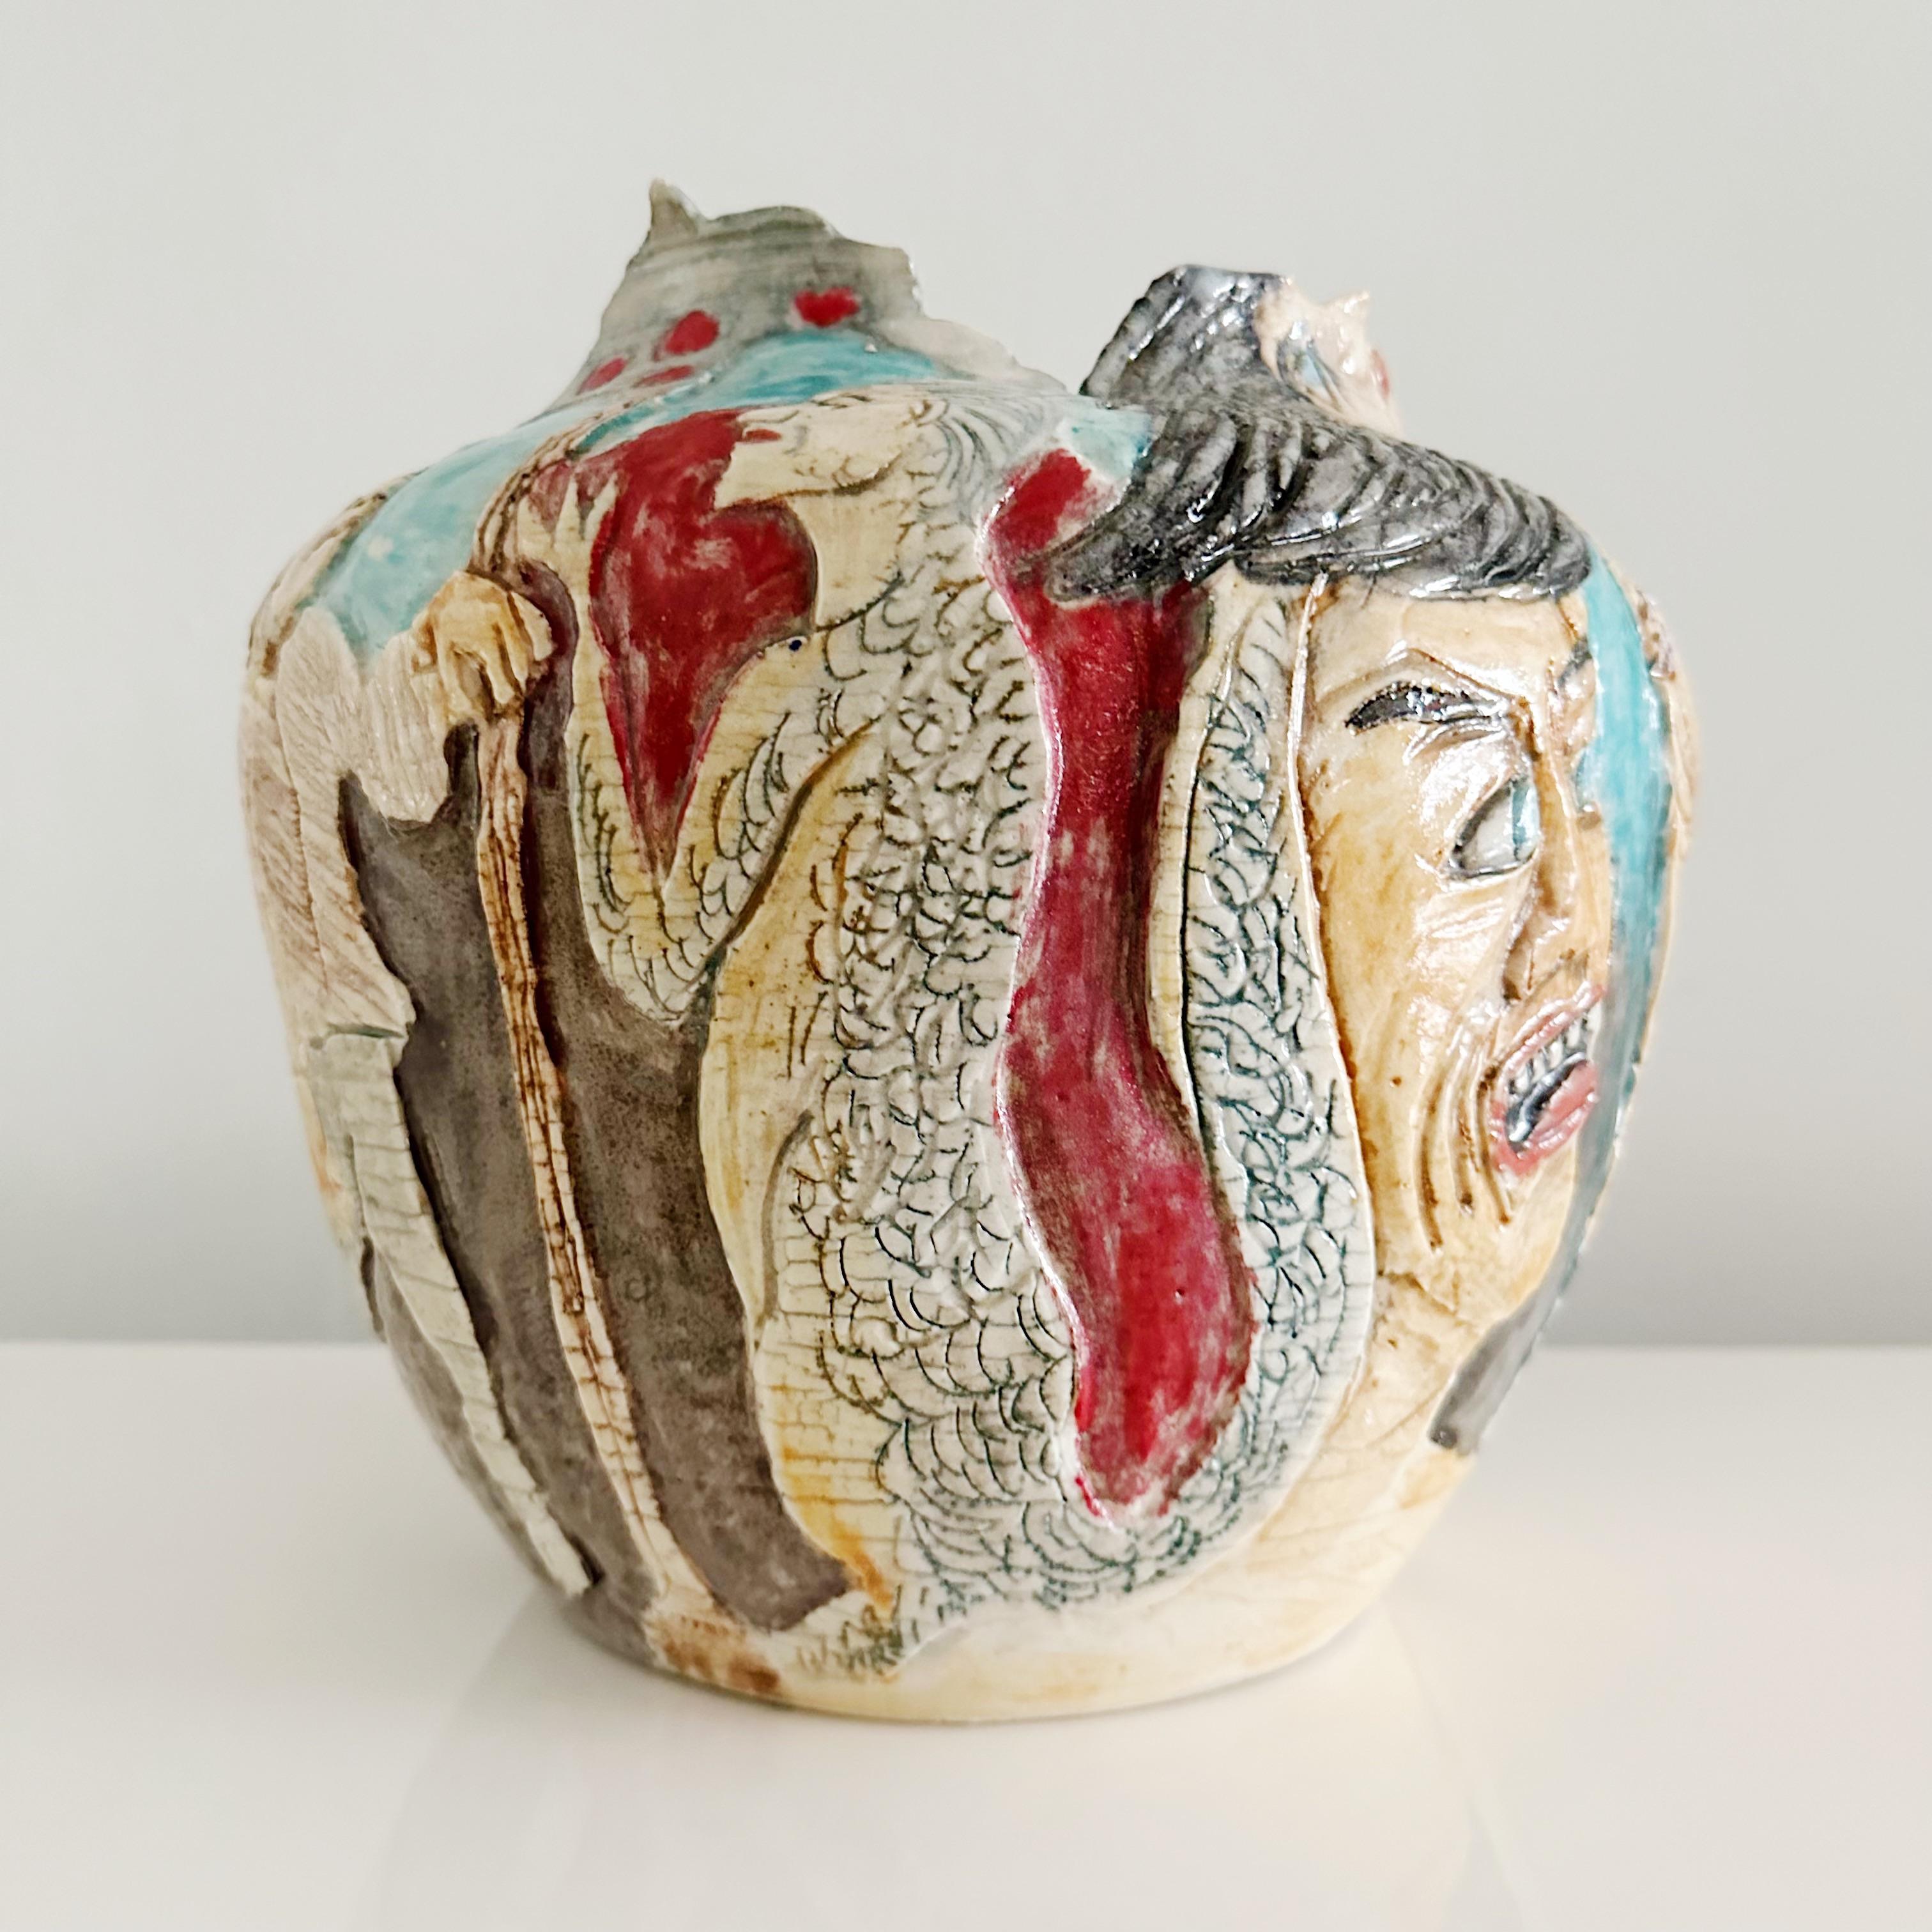 Hand made studio vase depicting different colorful characters, some naked, some not. This vase has and illegible signature on the underside and is dated 3/84.